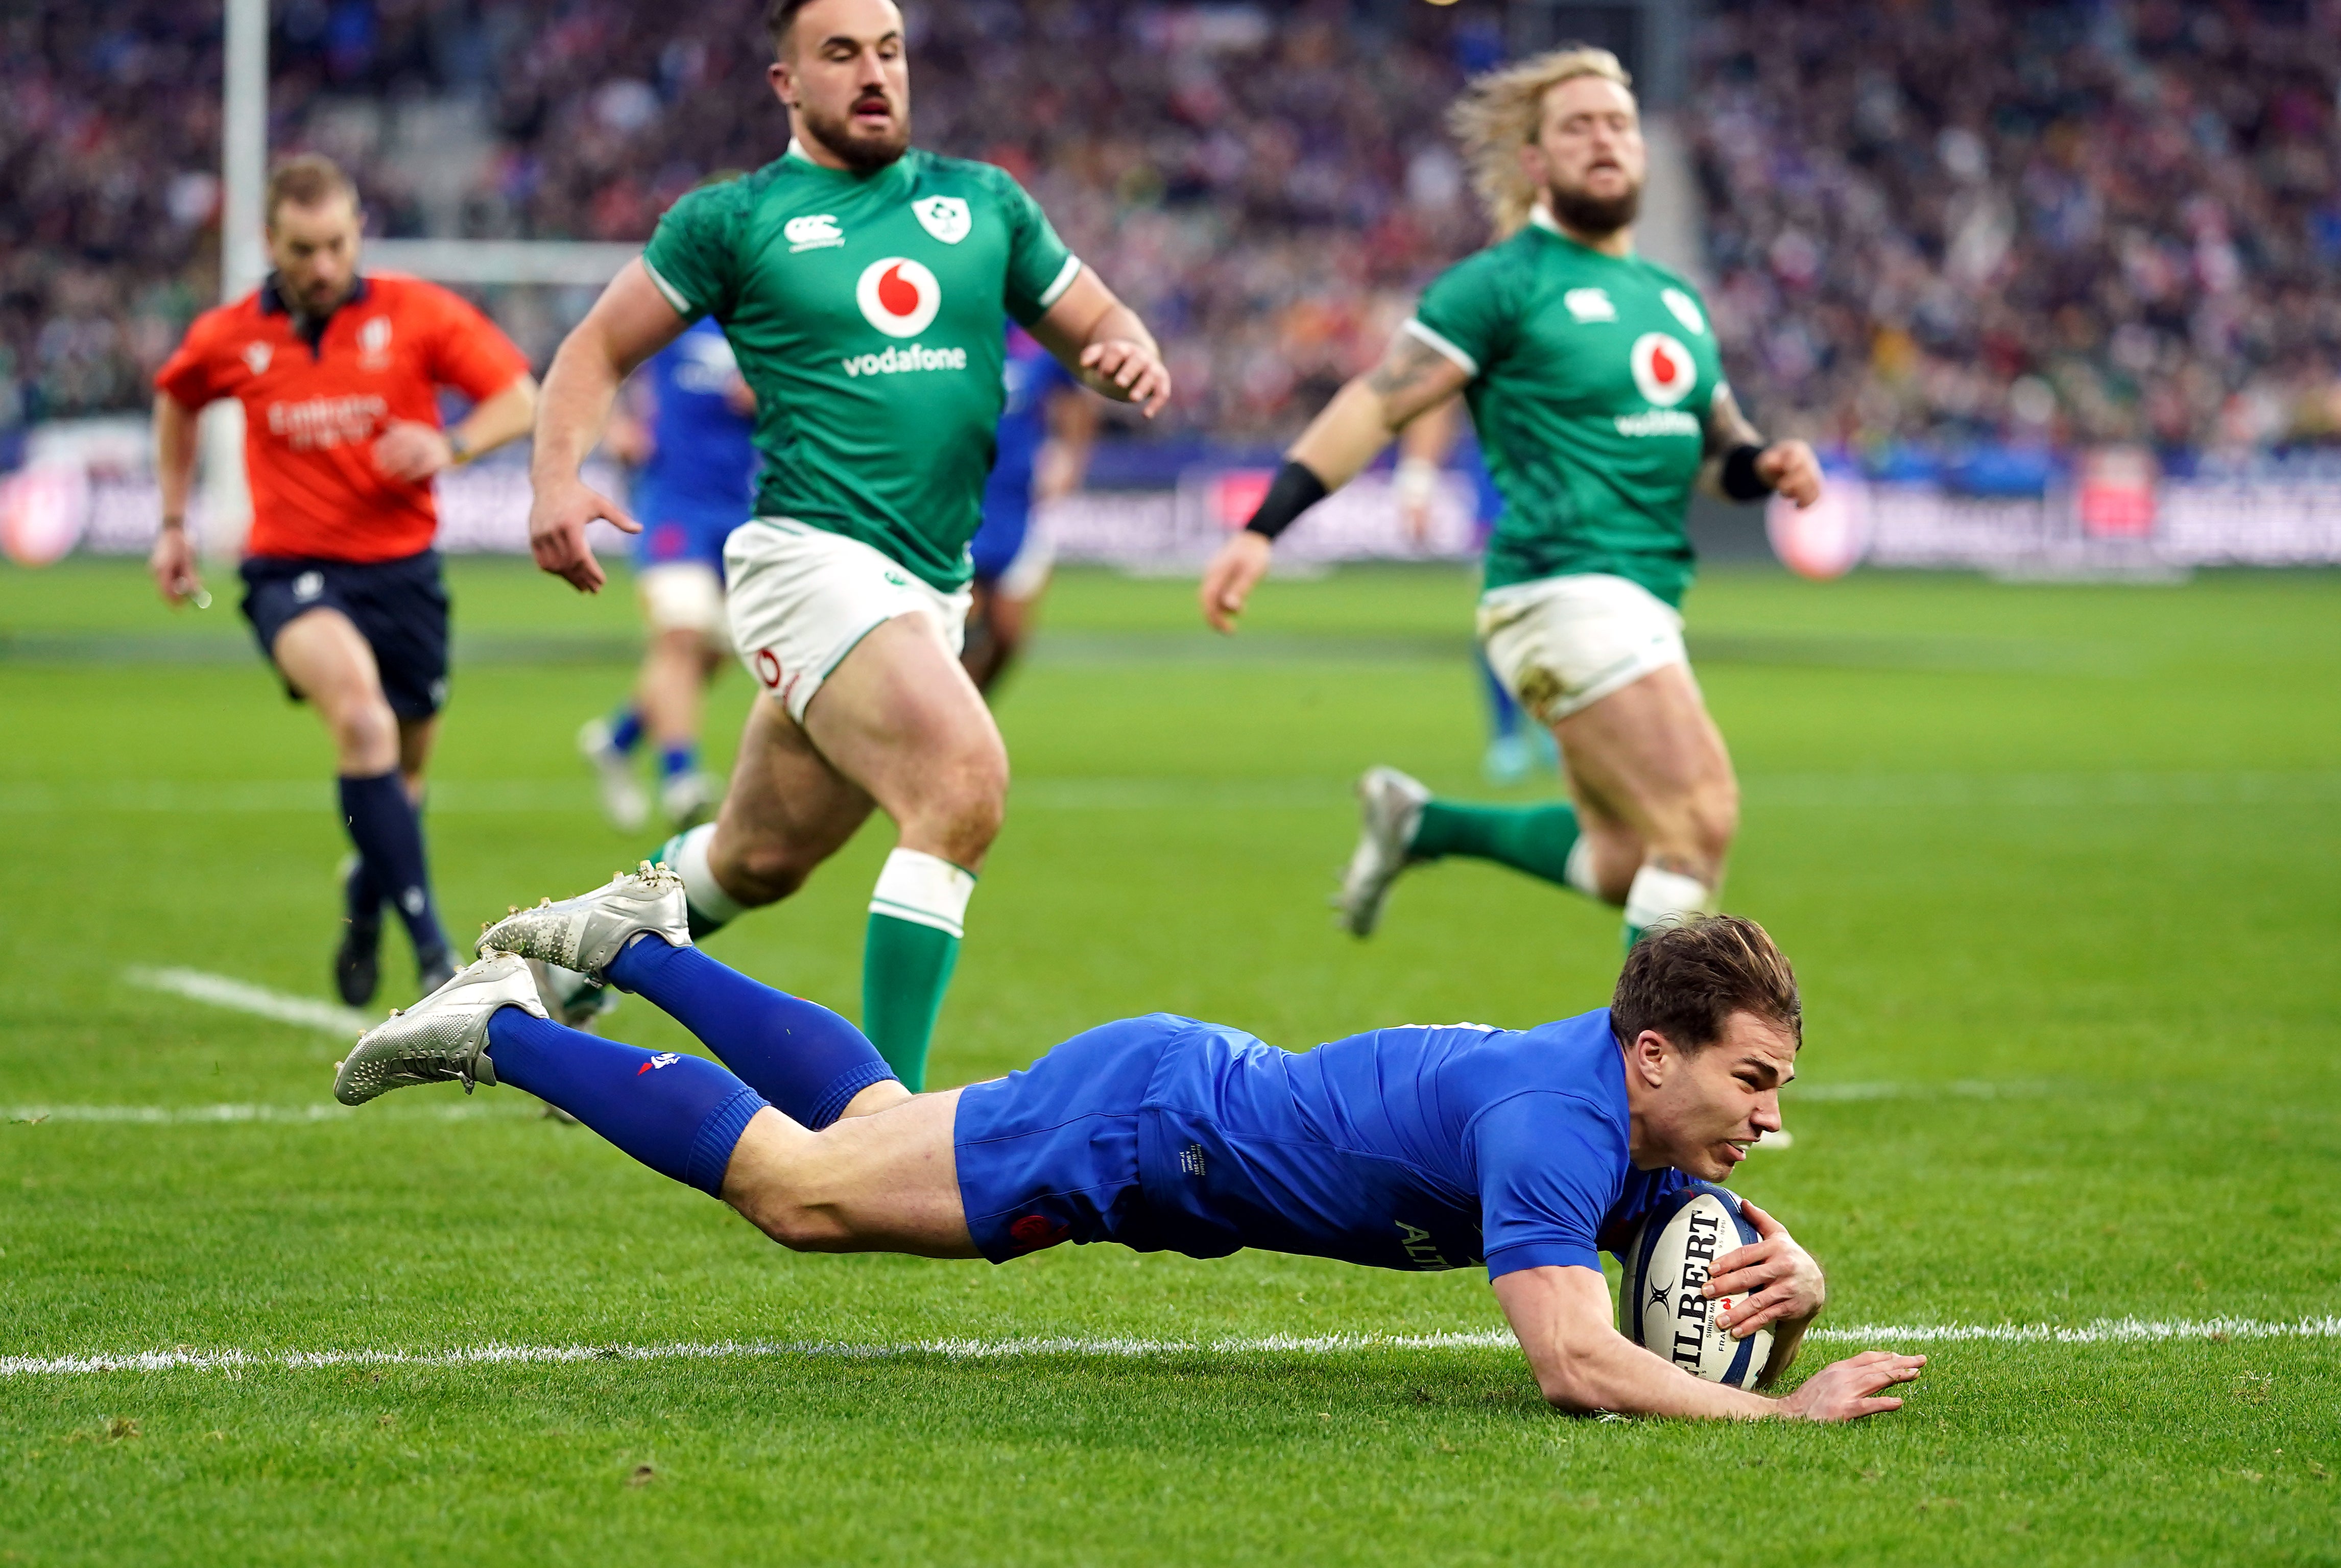 France’s Antoine Dupont dives in to score the opening try (Adam Davy/PA)